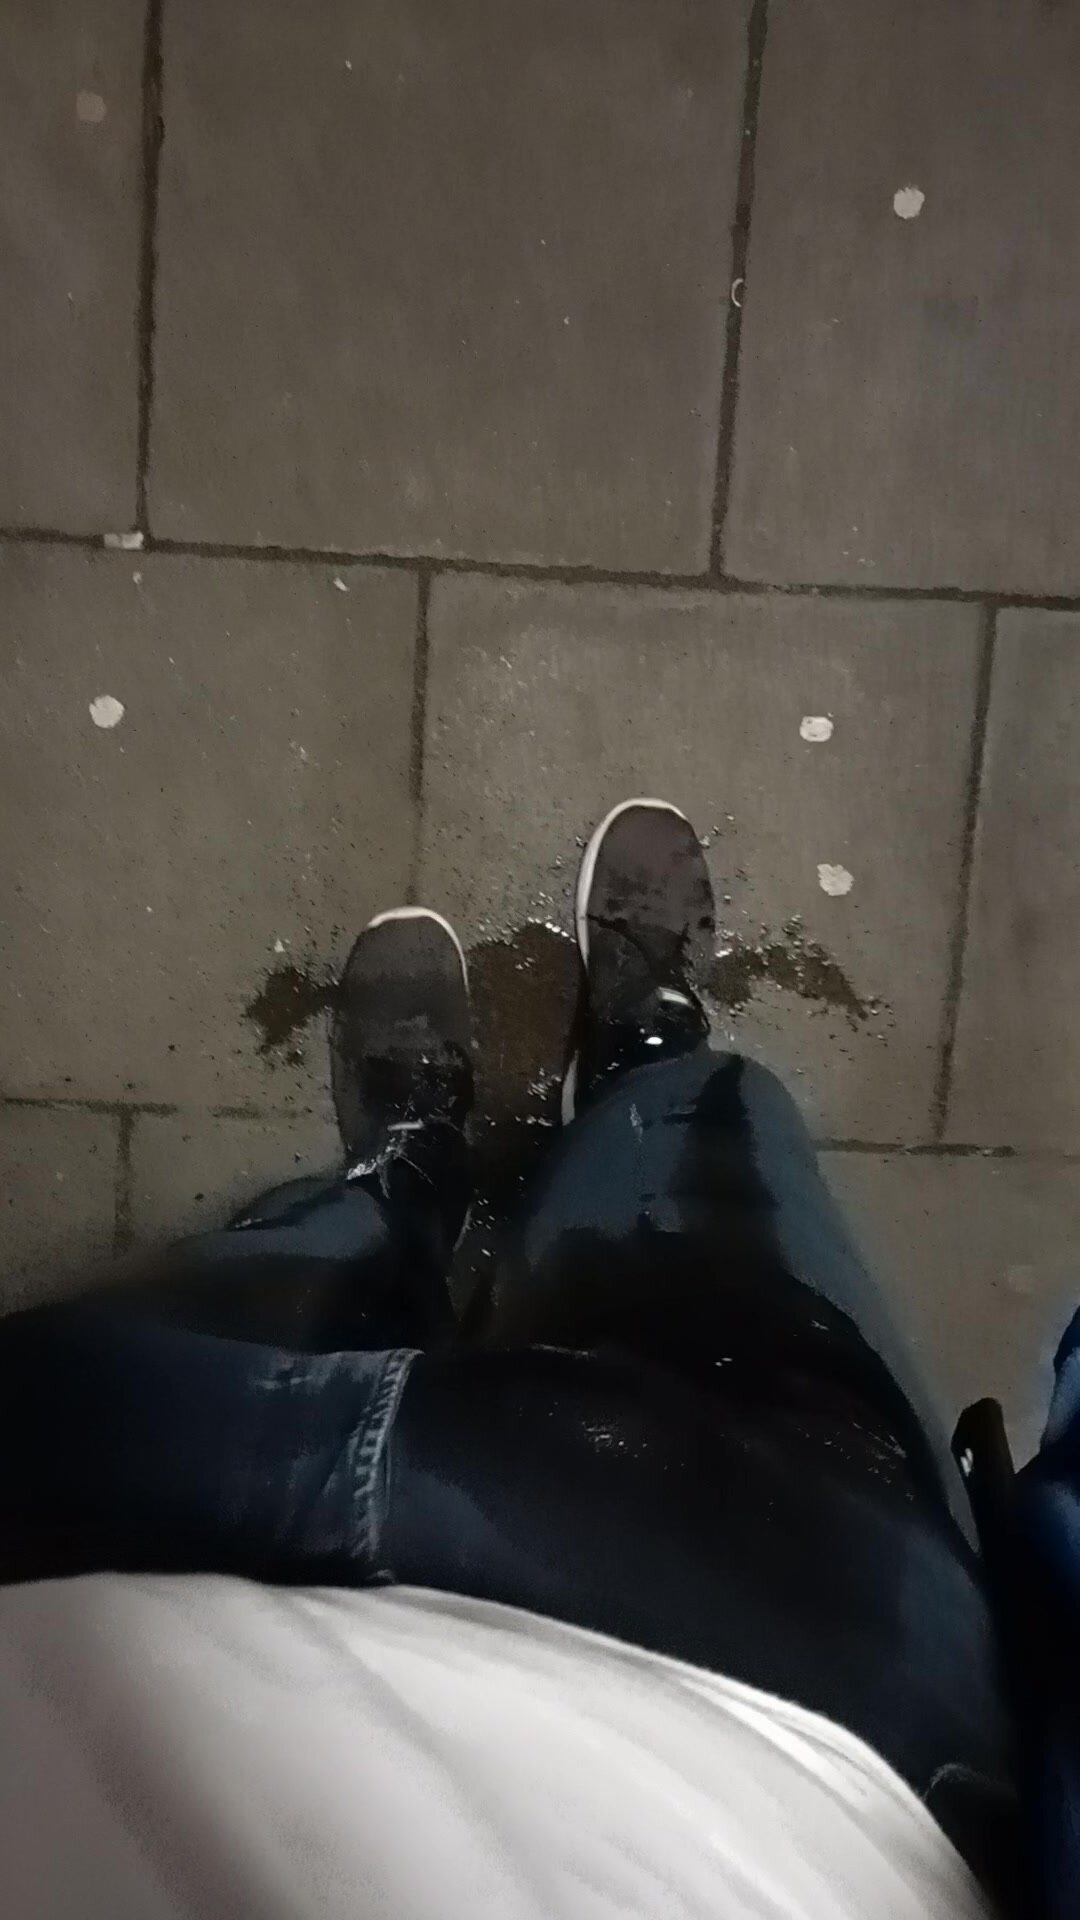 Soaked my jeans